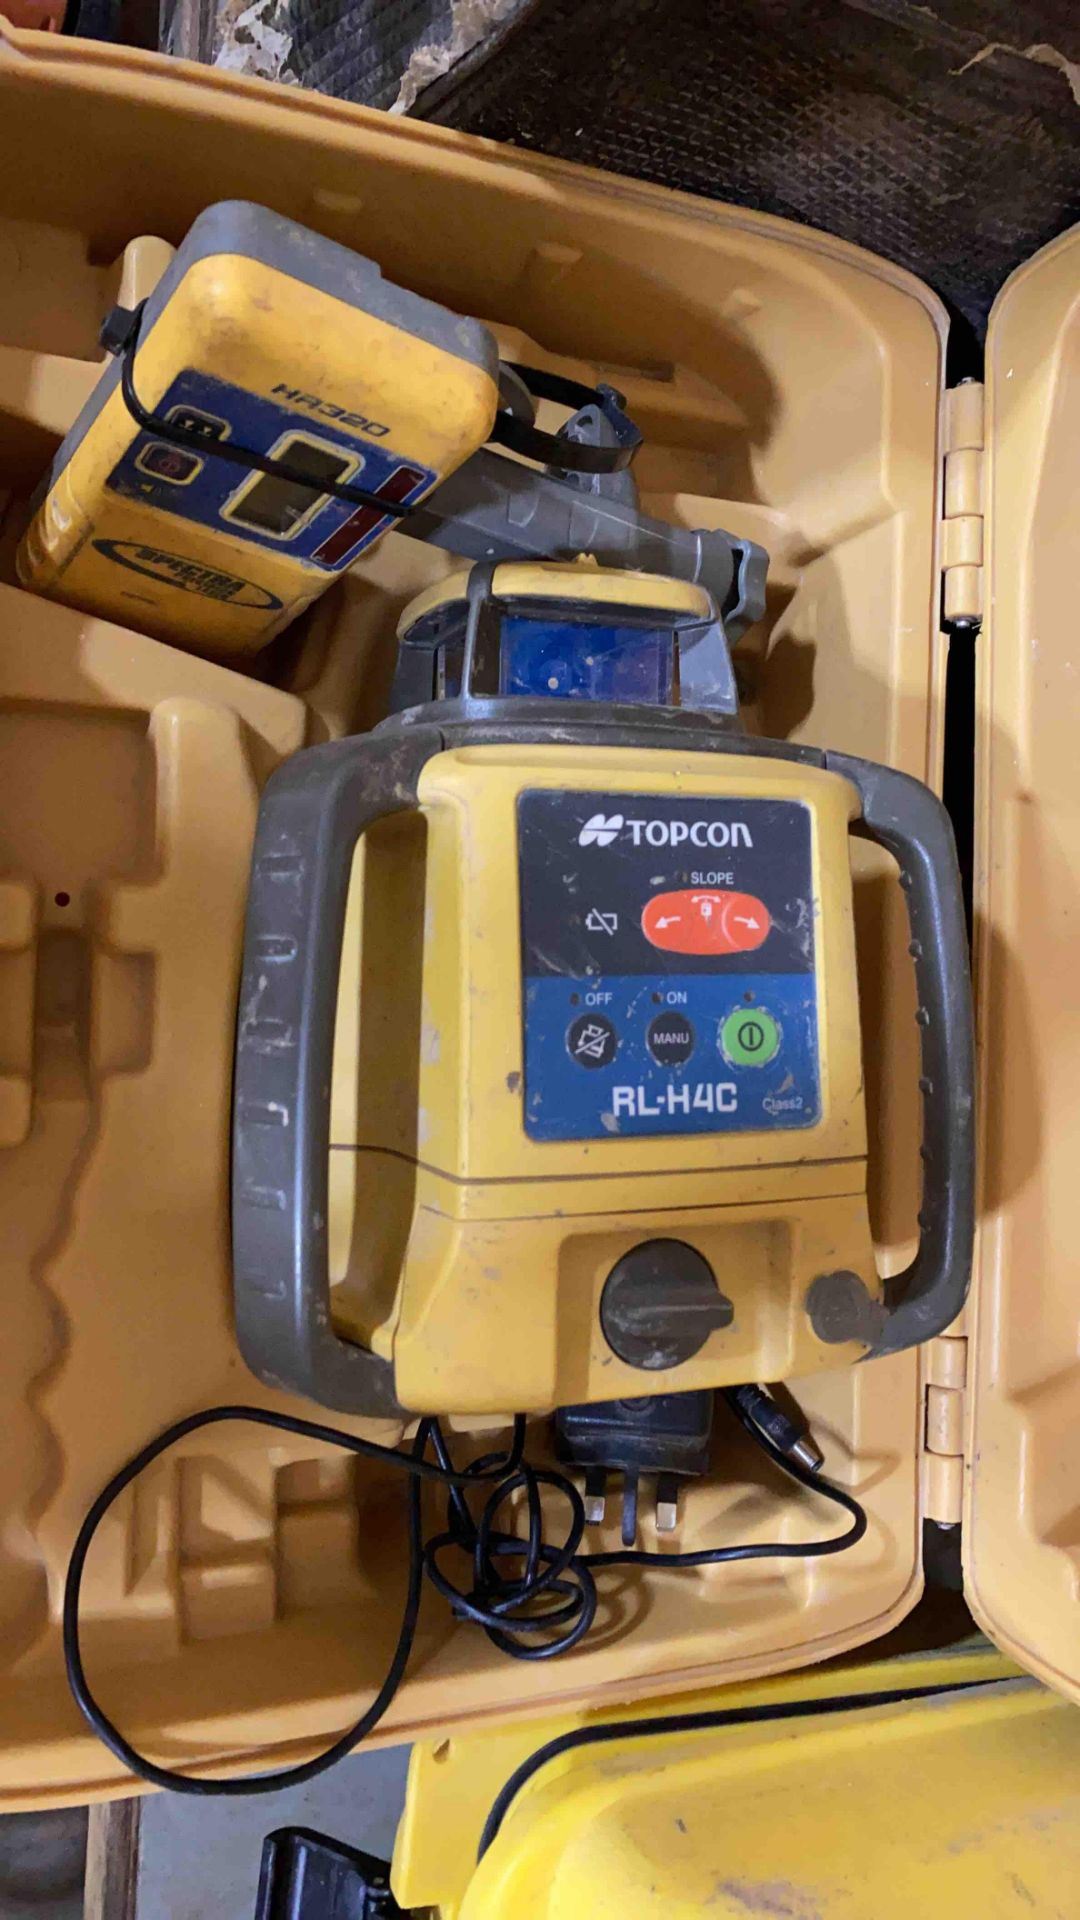 Topcon RL-H4C Laser Level, Complete with carry case and spectra HR320 hand held control - Image 2 of 4